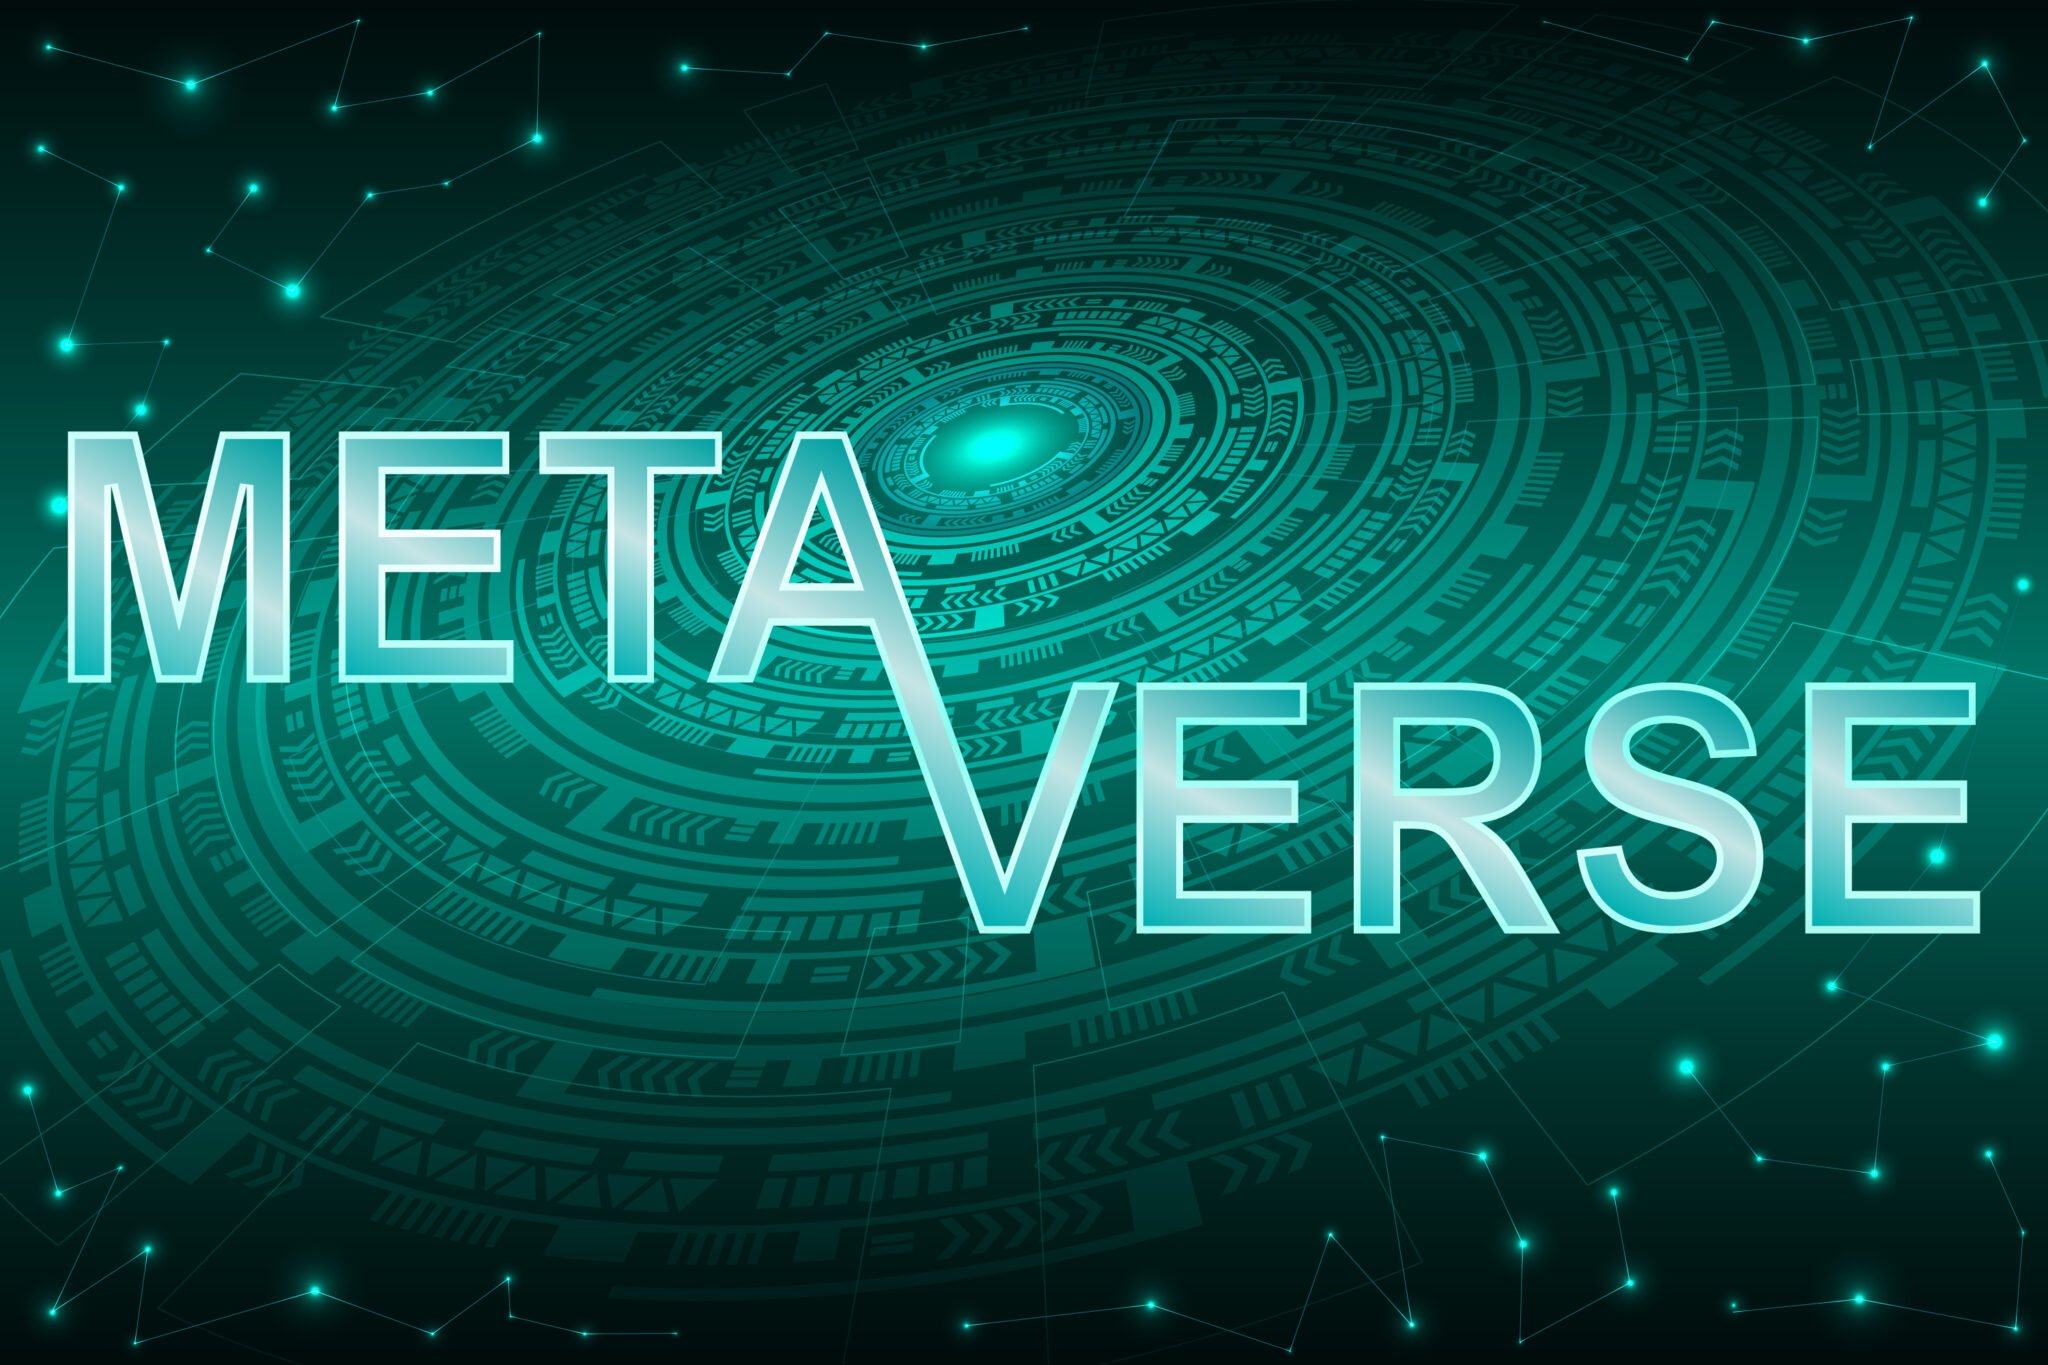 Metaverse text layout on abstract, futuristic, green background.  Metaverse, virtual reality, augmented reality and blockchain technology, user interface 3D experience.